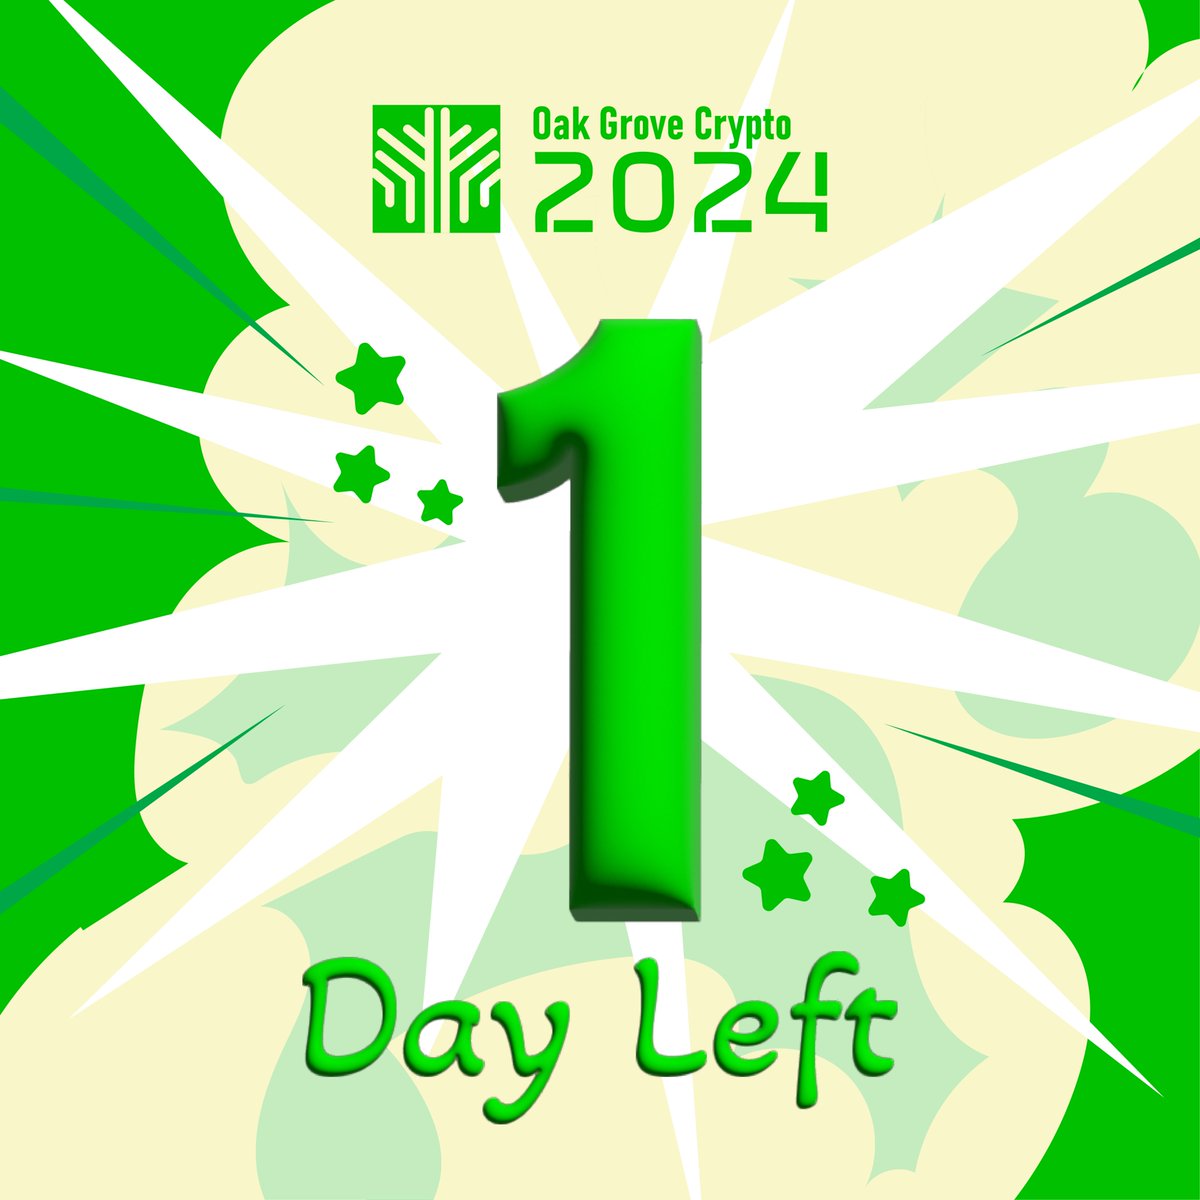 Less than 24 hours left!🔥 Join us before the clock strikes midnight🕛 in Hong Kong. Meet top minds, builders, developers, investors at #OakGroveCrypto2024 tomorrow! Secure your spot👉: lu.ma/oakgrove2024 🌟Host: @OakGroveVC 💫Co-Host: @PolyhedraZK @AlchemyPay